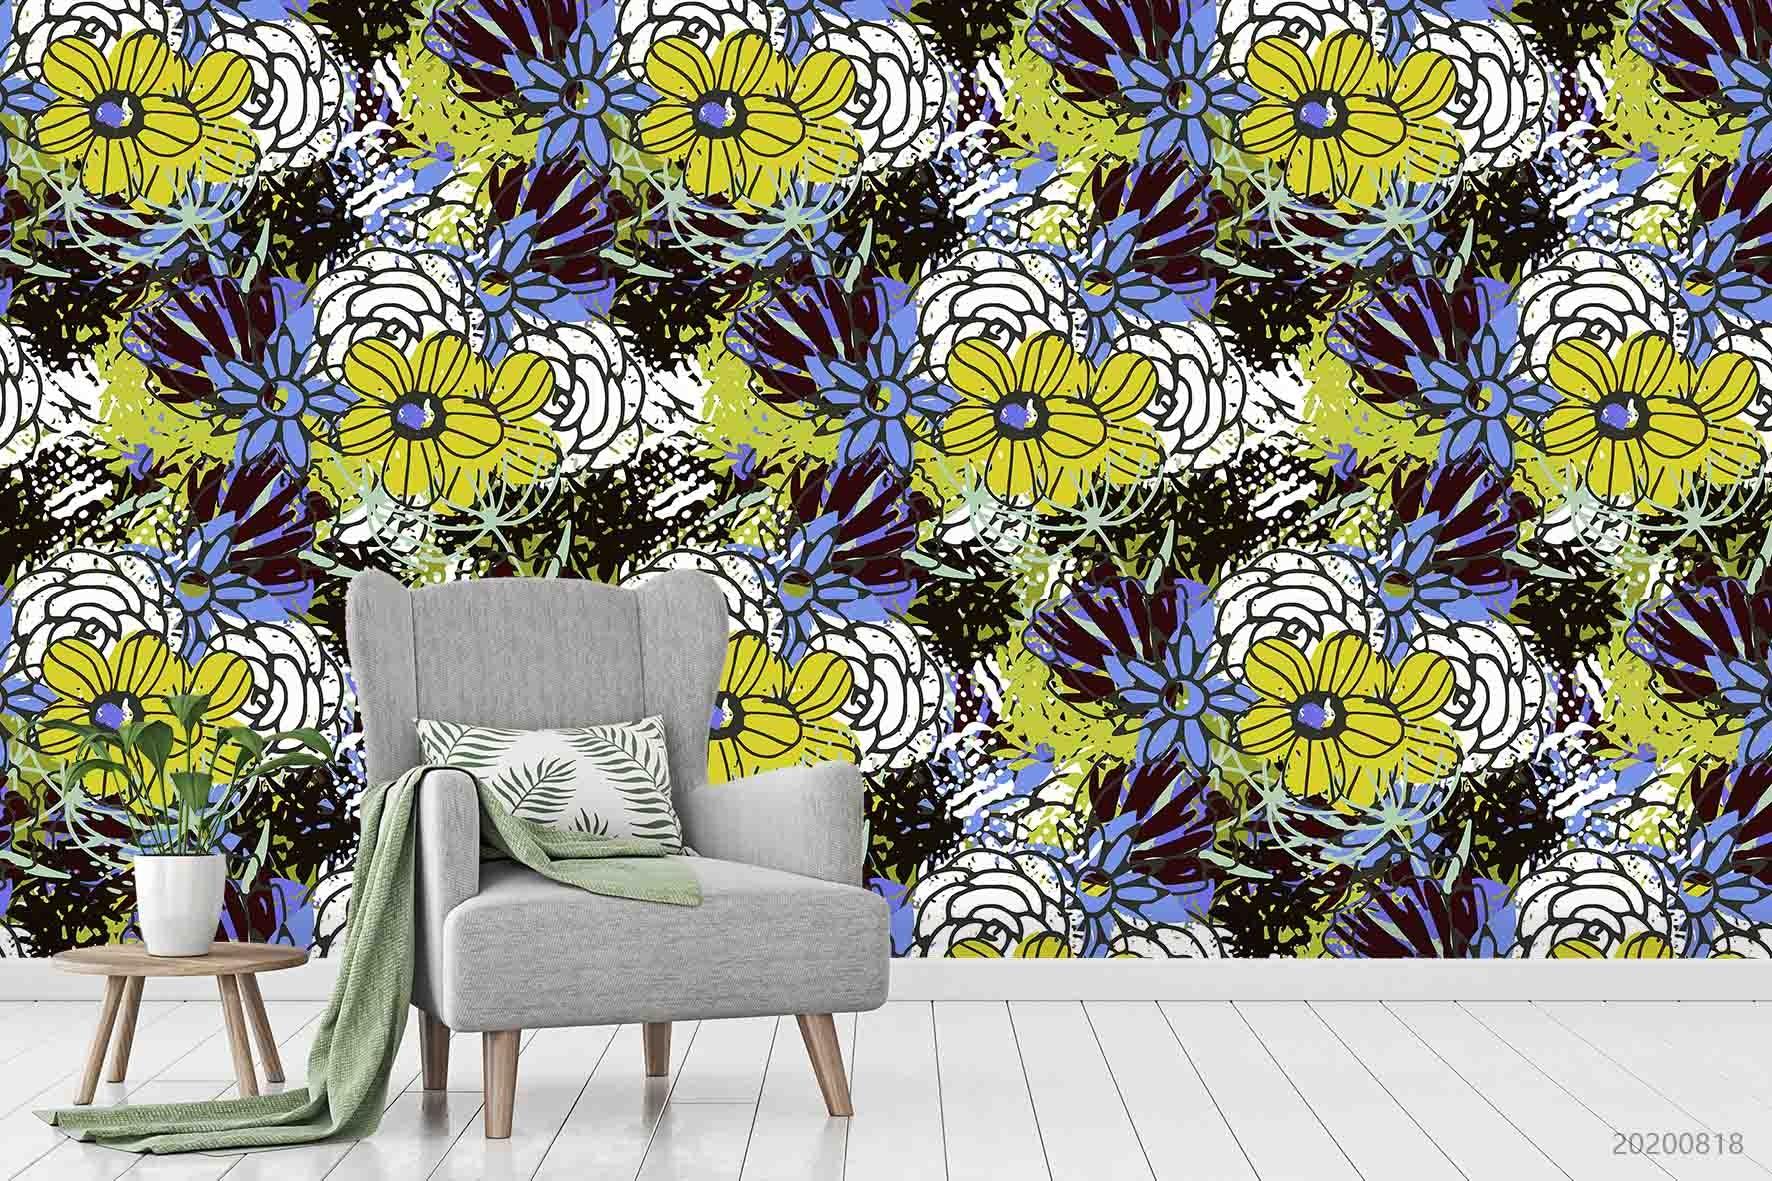 3D Vintage Abstract Floral Pattern Wall Mural Wallpaper LXL 1171- Jess Art Decoration